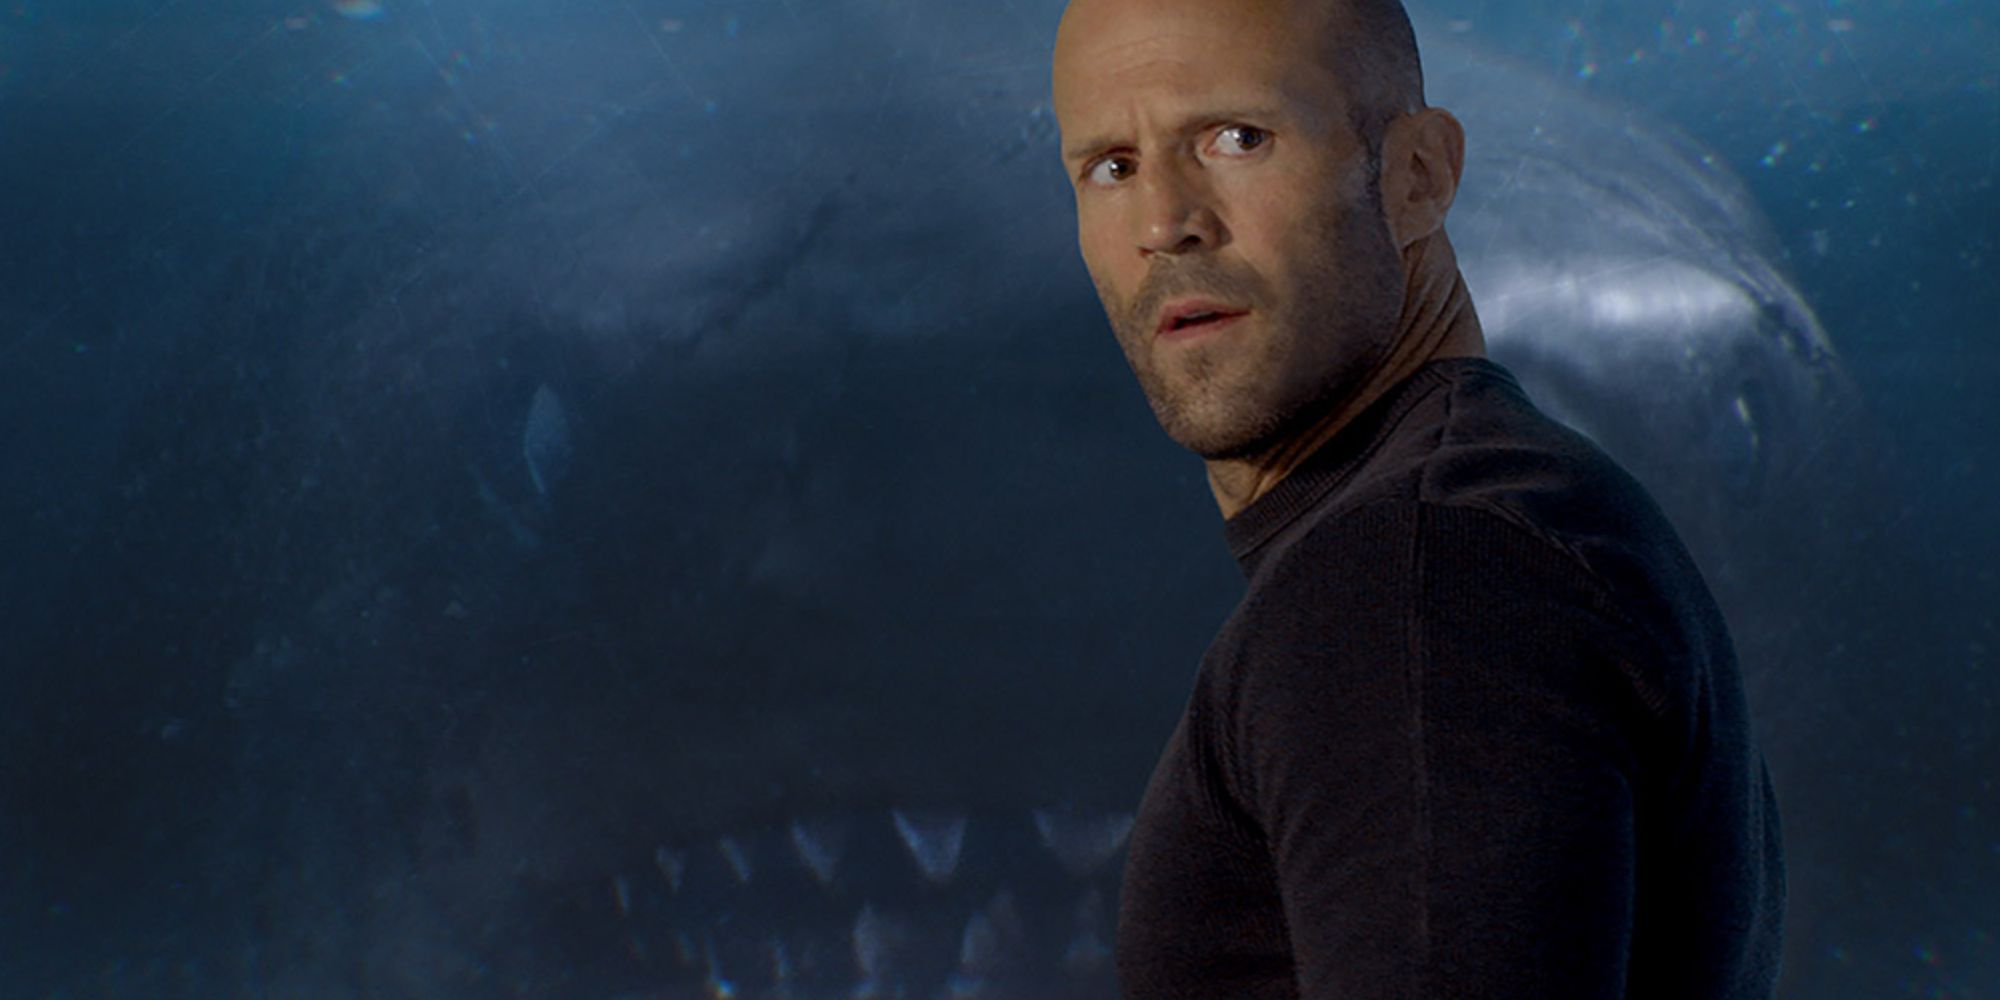 Jonas Taylor with the megaladon behind him in The Meg.